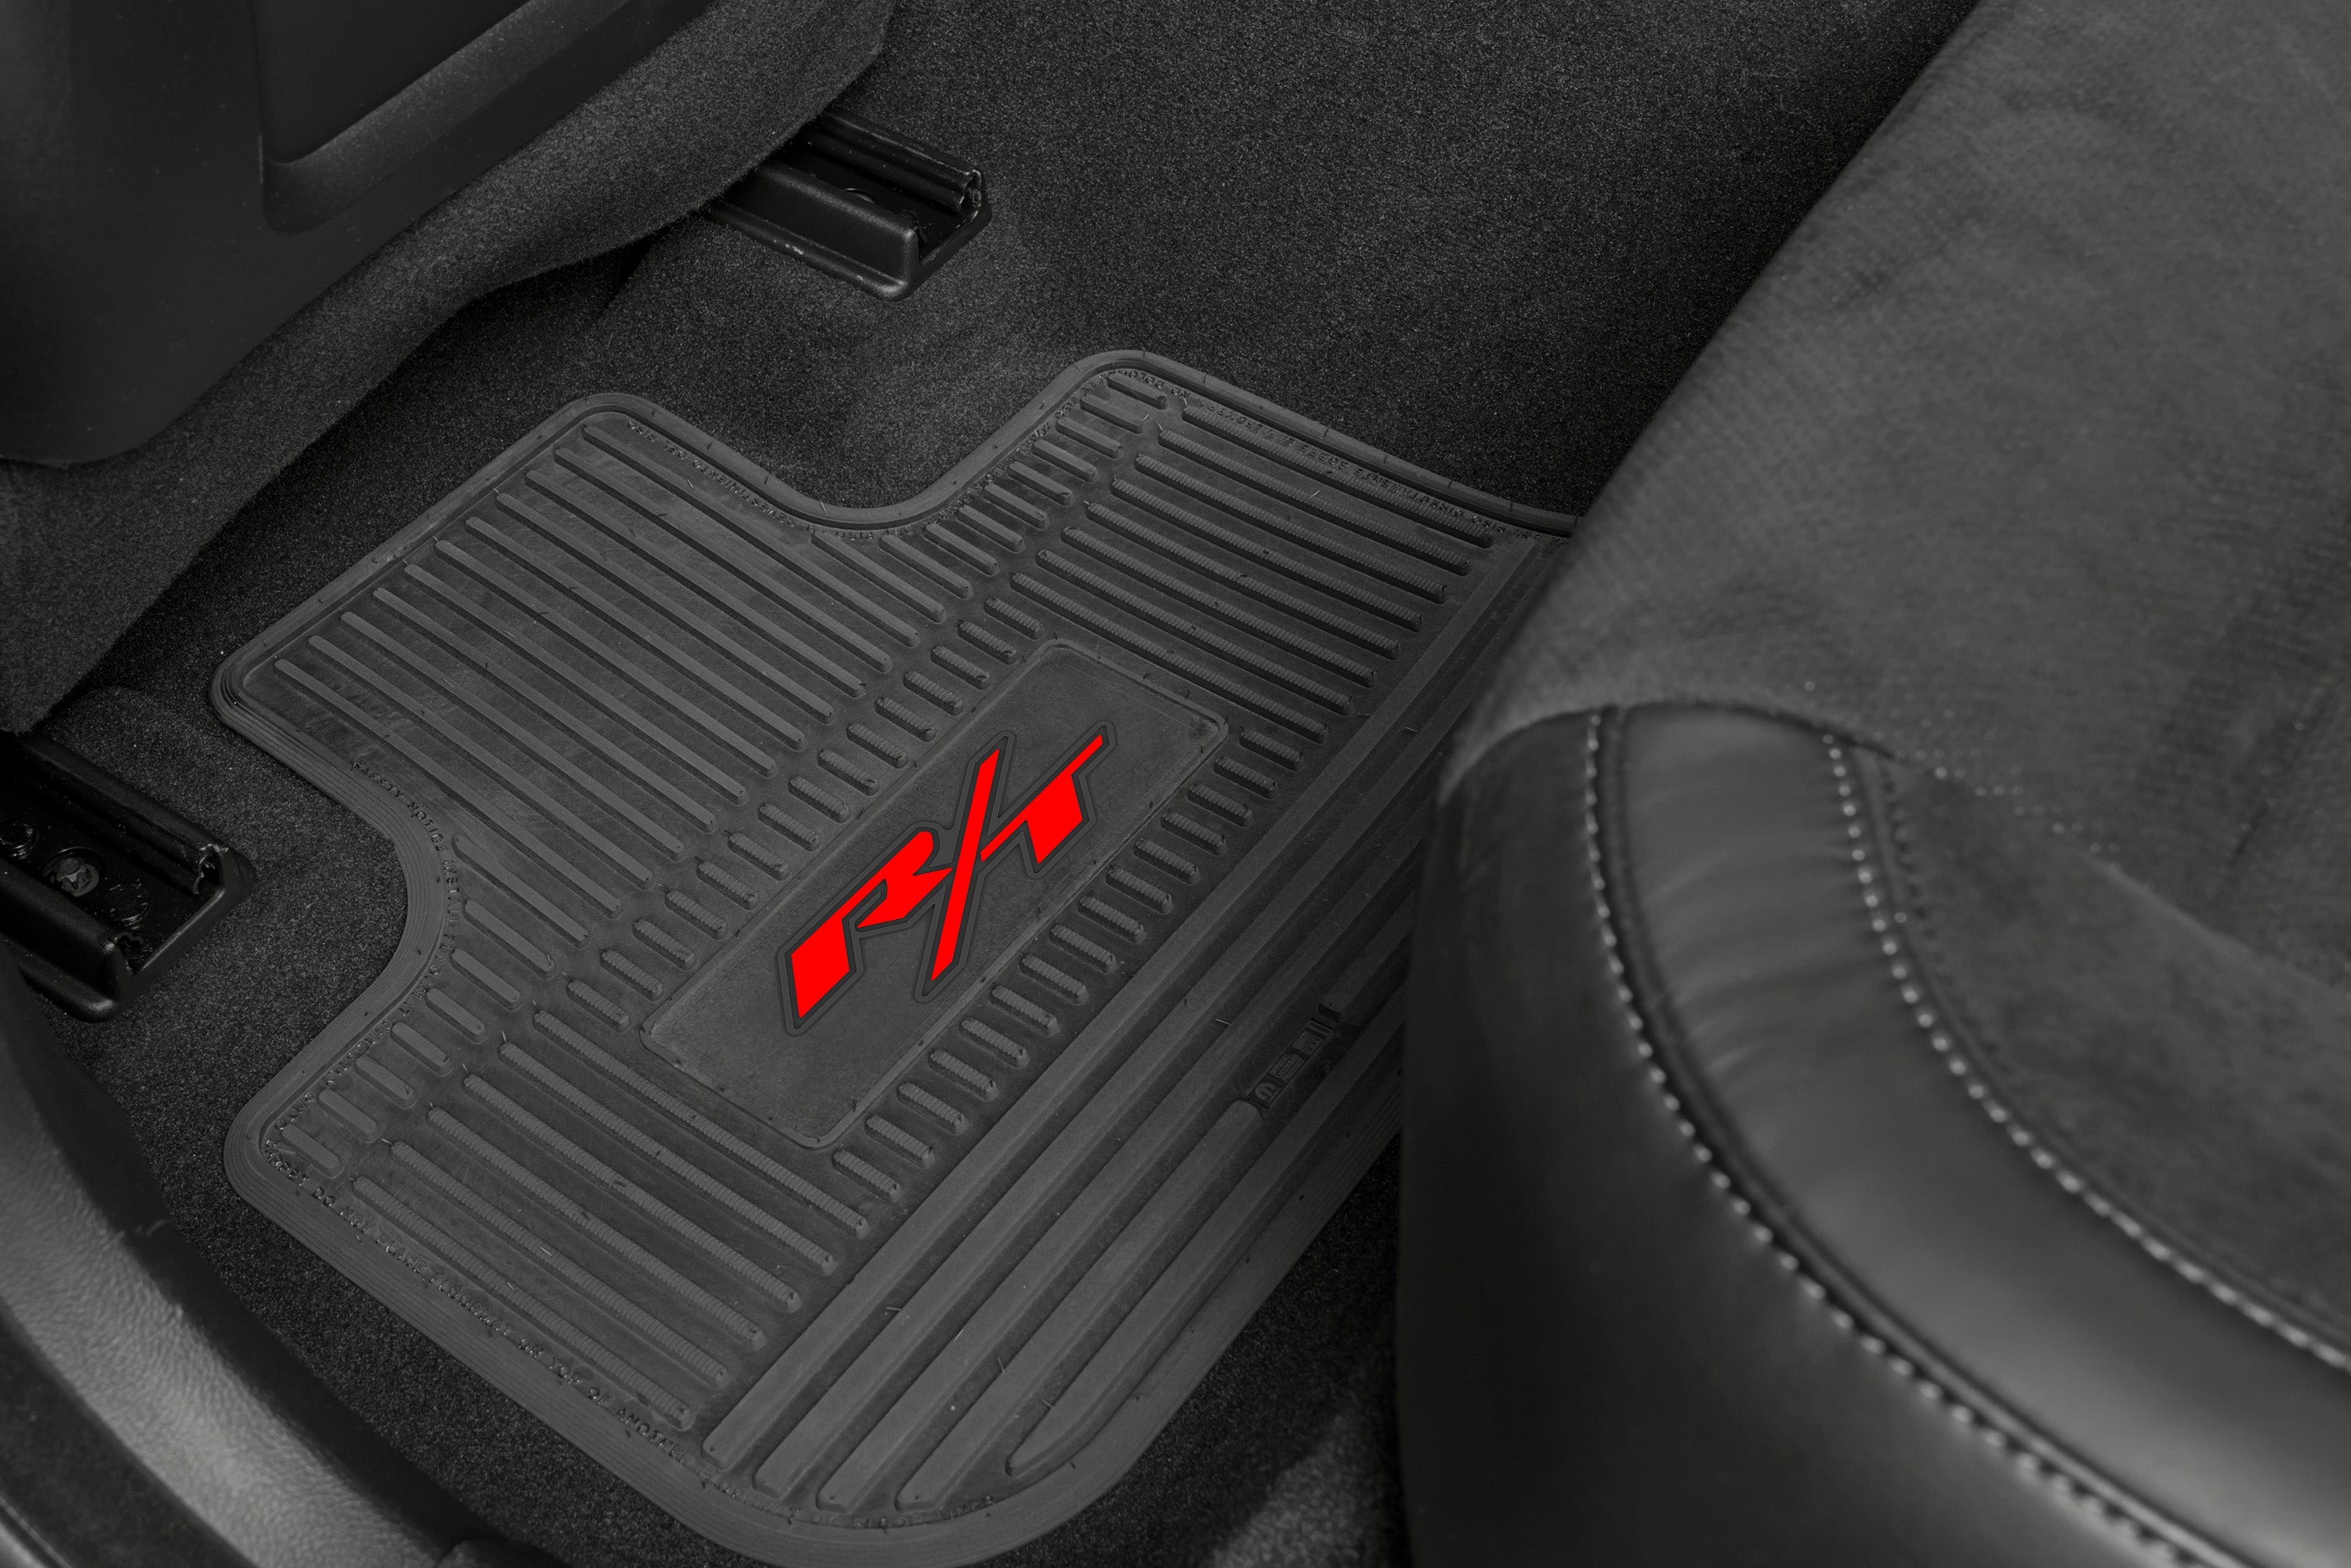 Charger Floor Mats 11-24 Dodge Charger RWD 4 Piece Custom Vintage Scene w/ R/T (2015-Current) Insert - Black w/ Pink Insert FlexTread